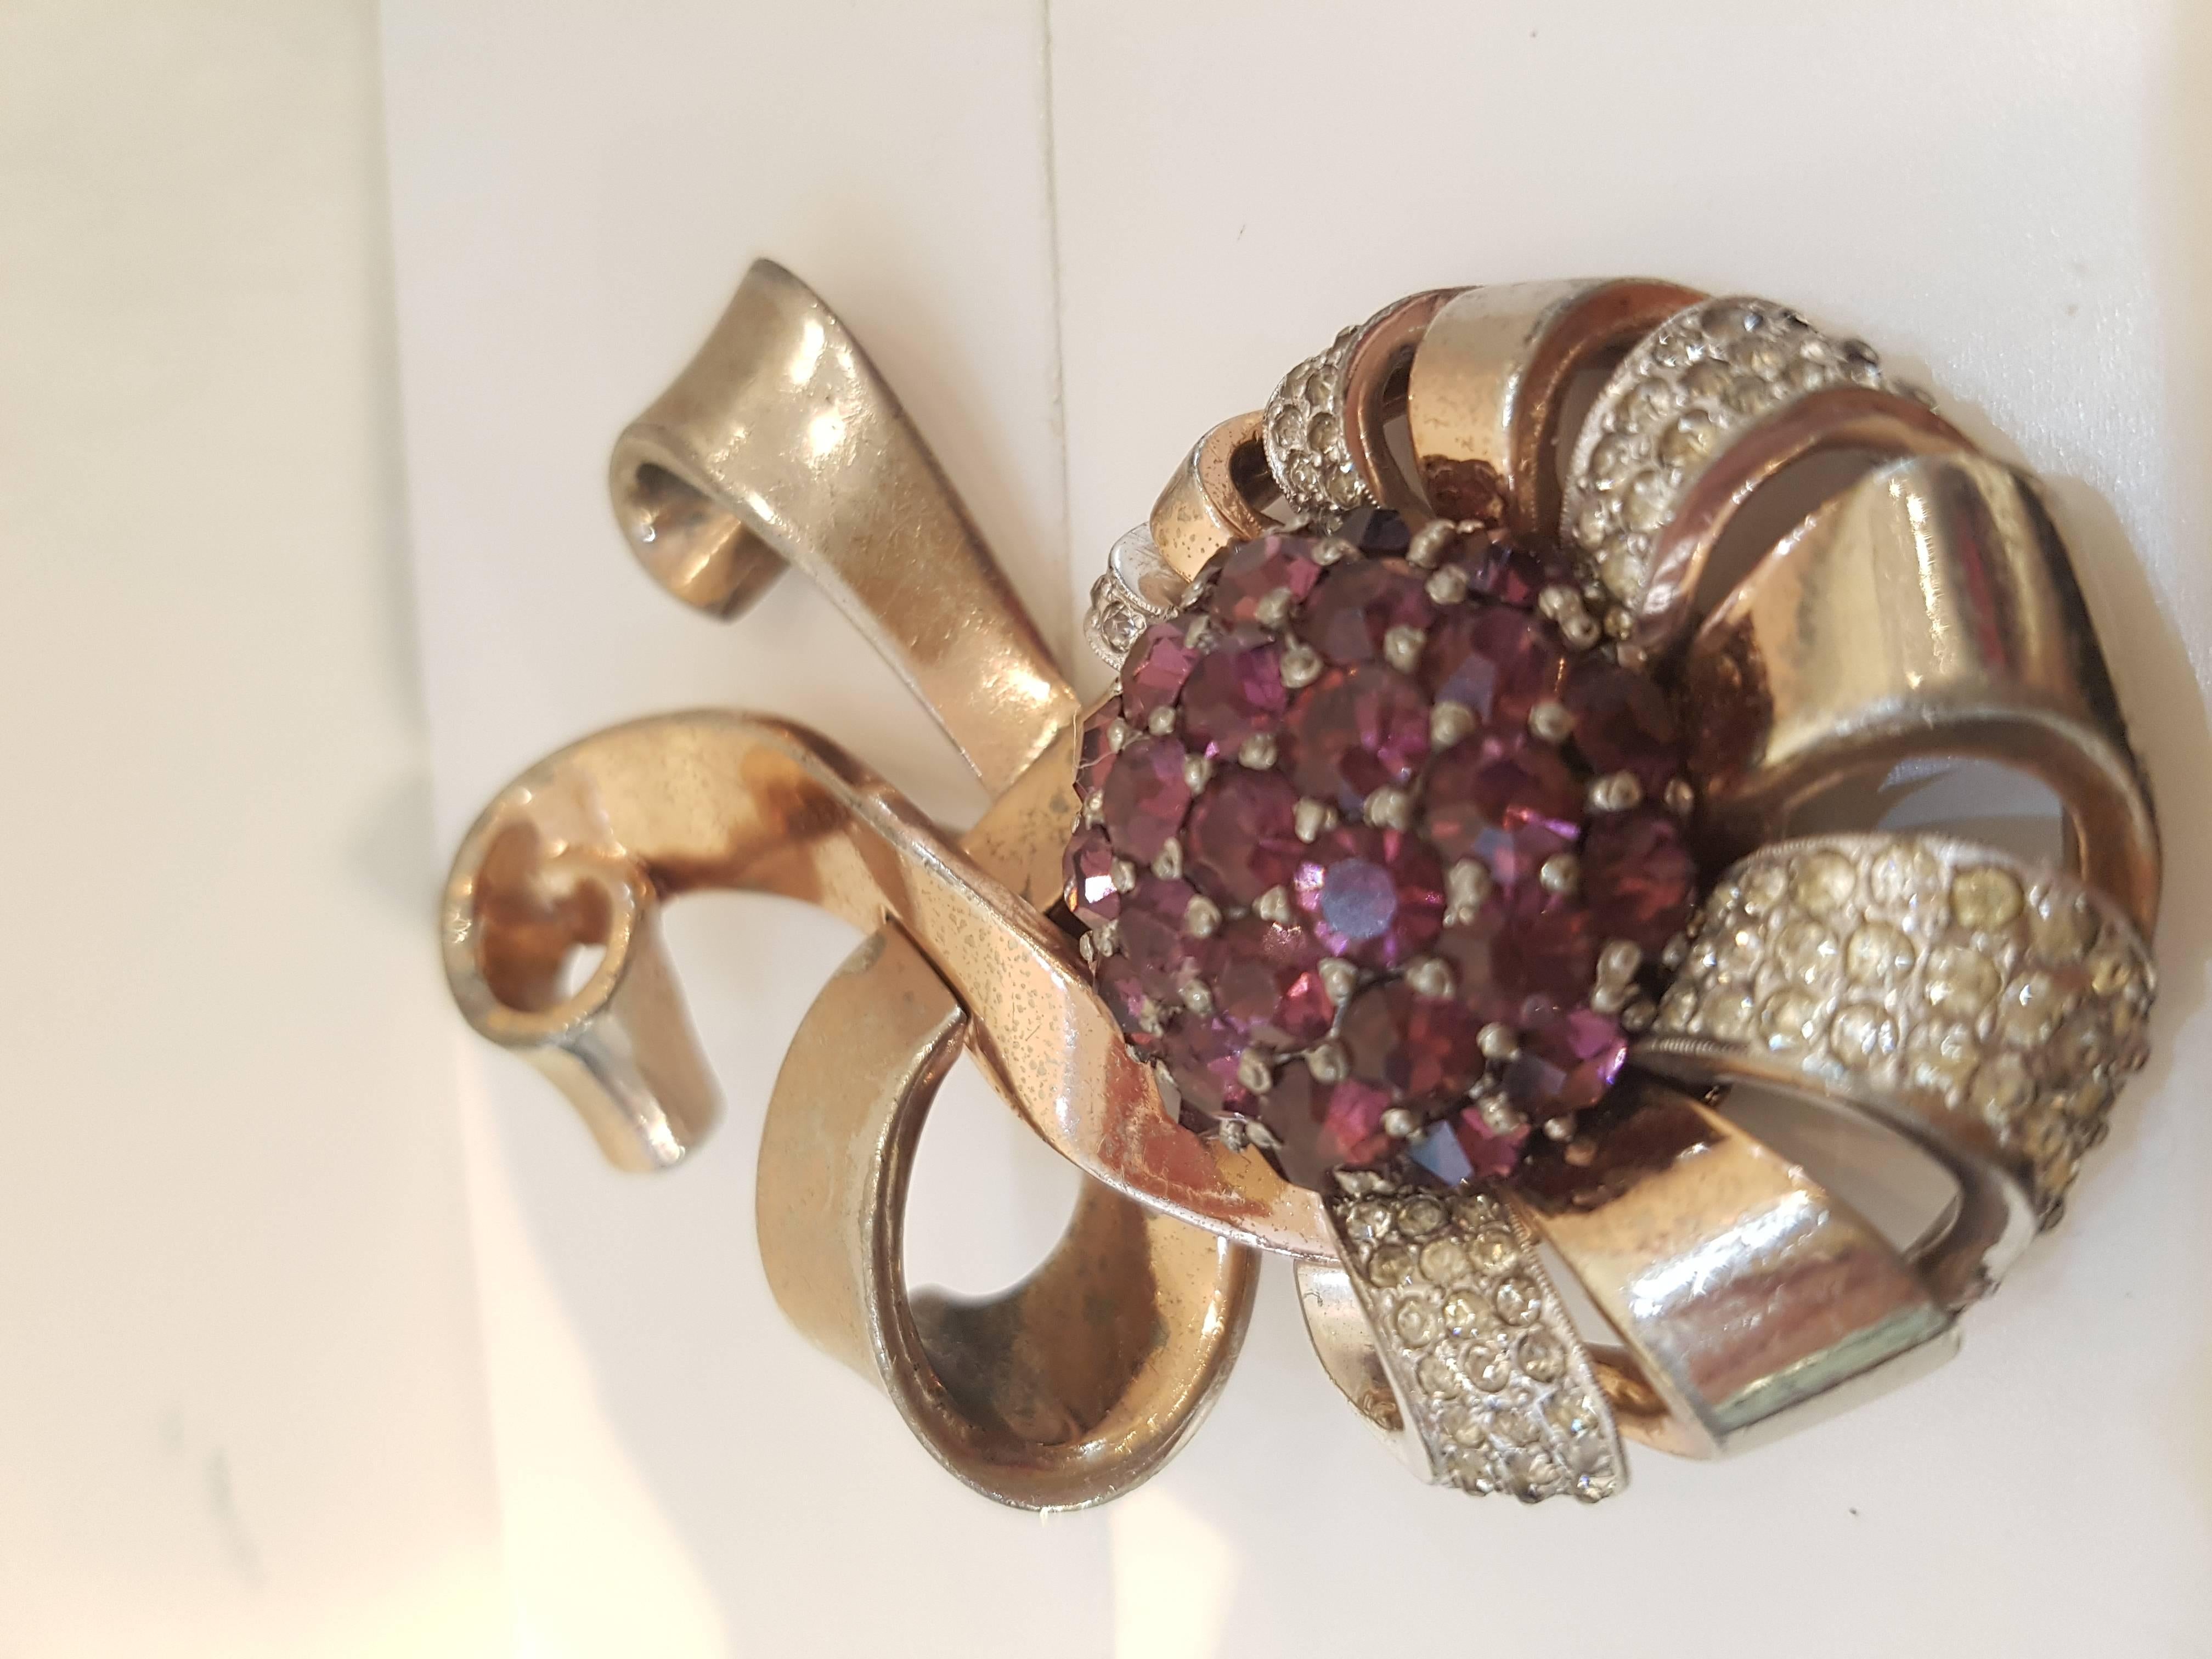 1970s Pennino Vintage Brooch

silver and pale rose tone with purple and crystal tone stones